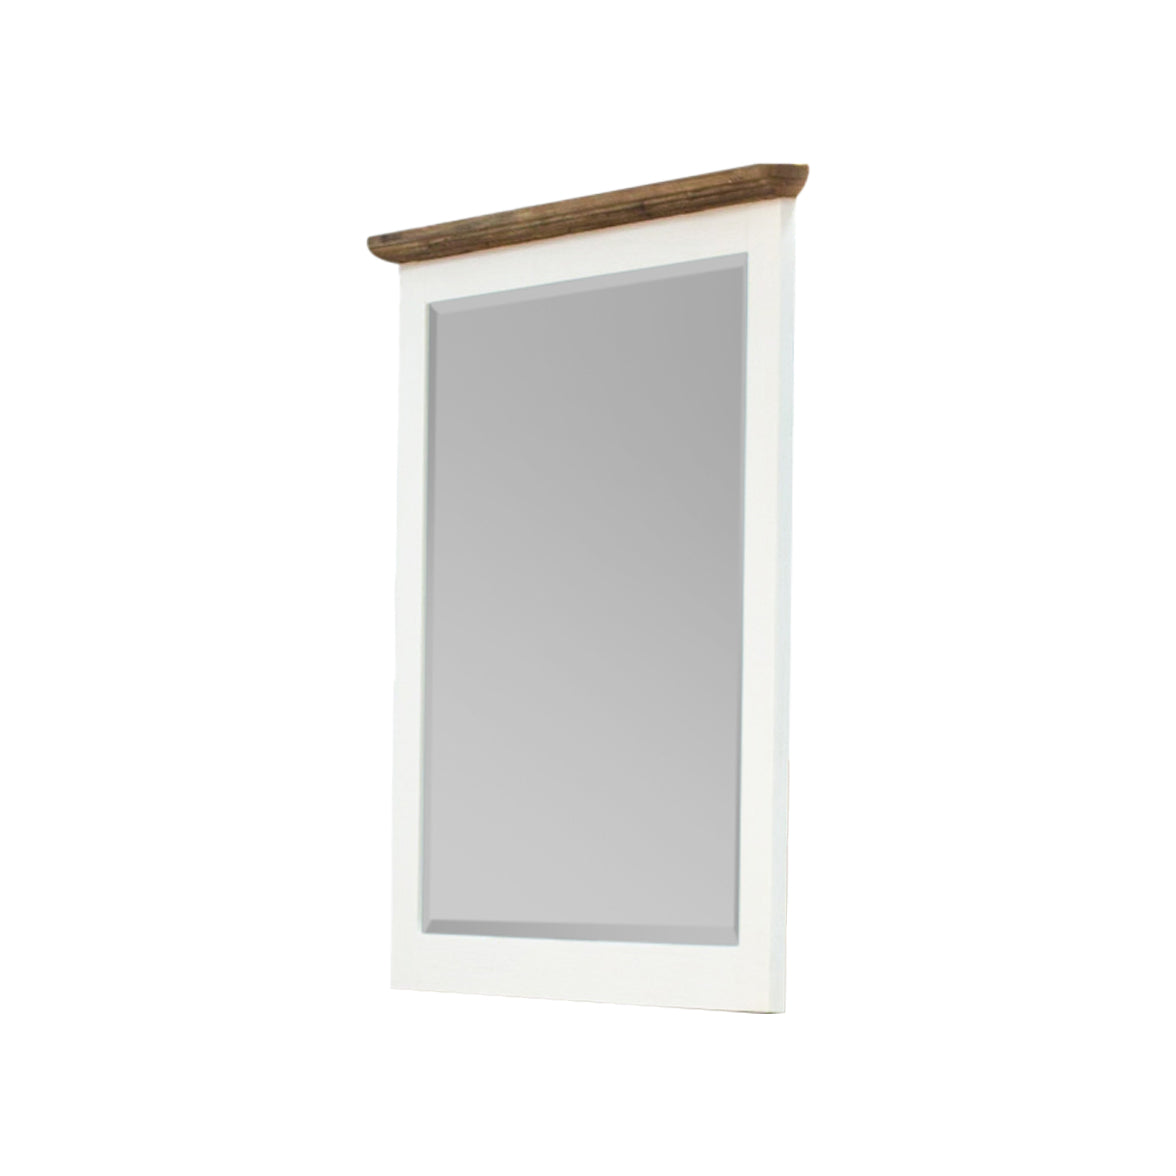 Orville Dressing Table Mirror in Acacia Wood Frame - Multicolour - Notbrand